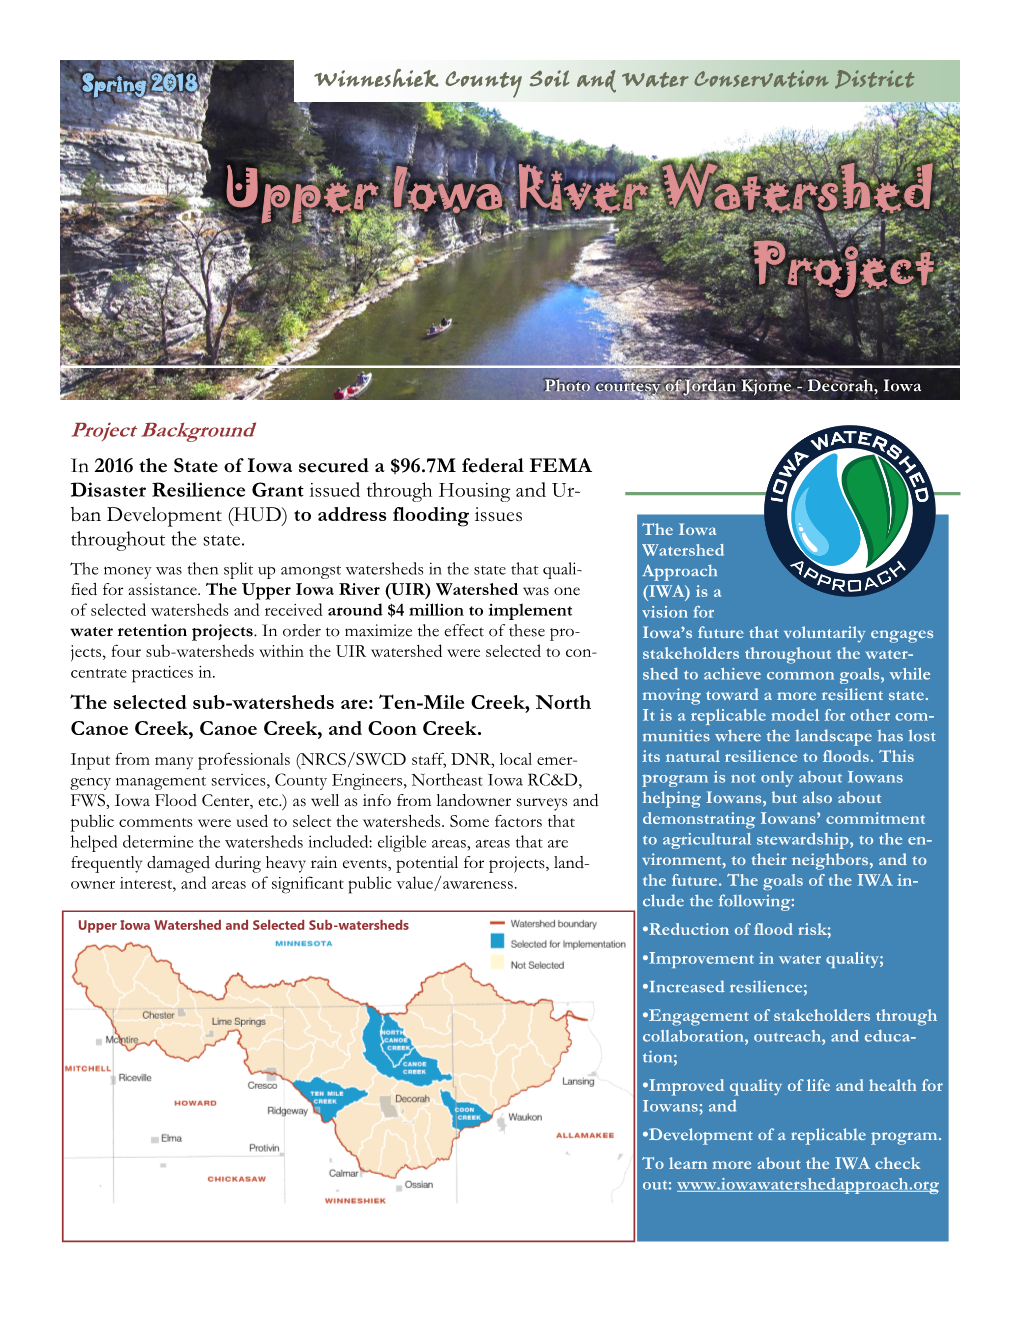 Upper Iowa River Watershed Project